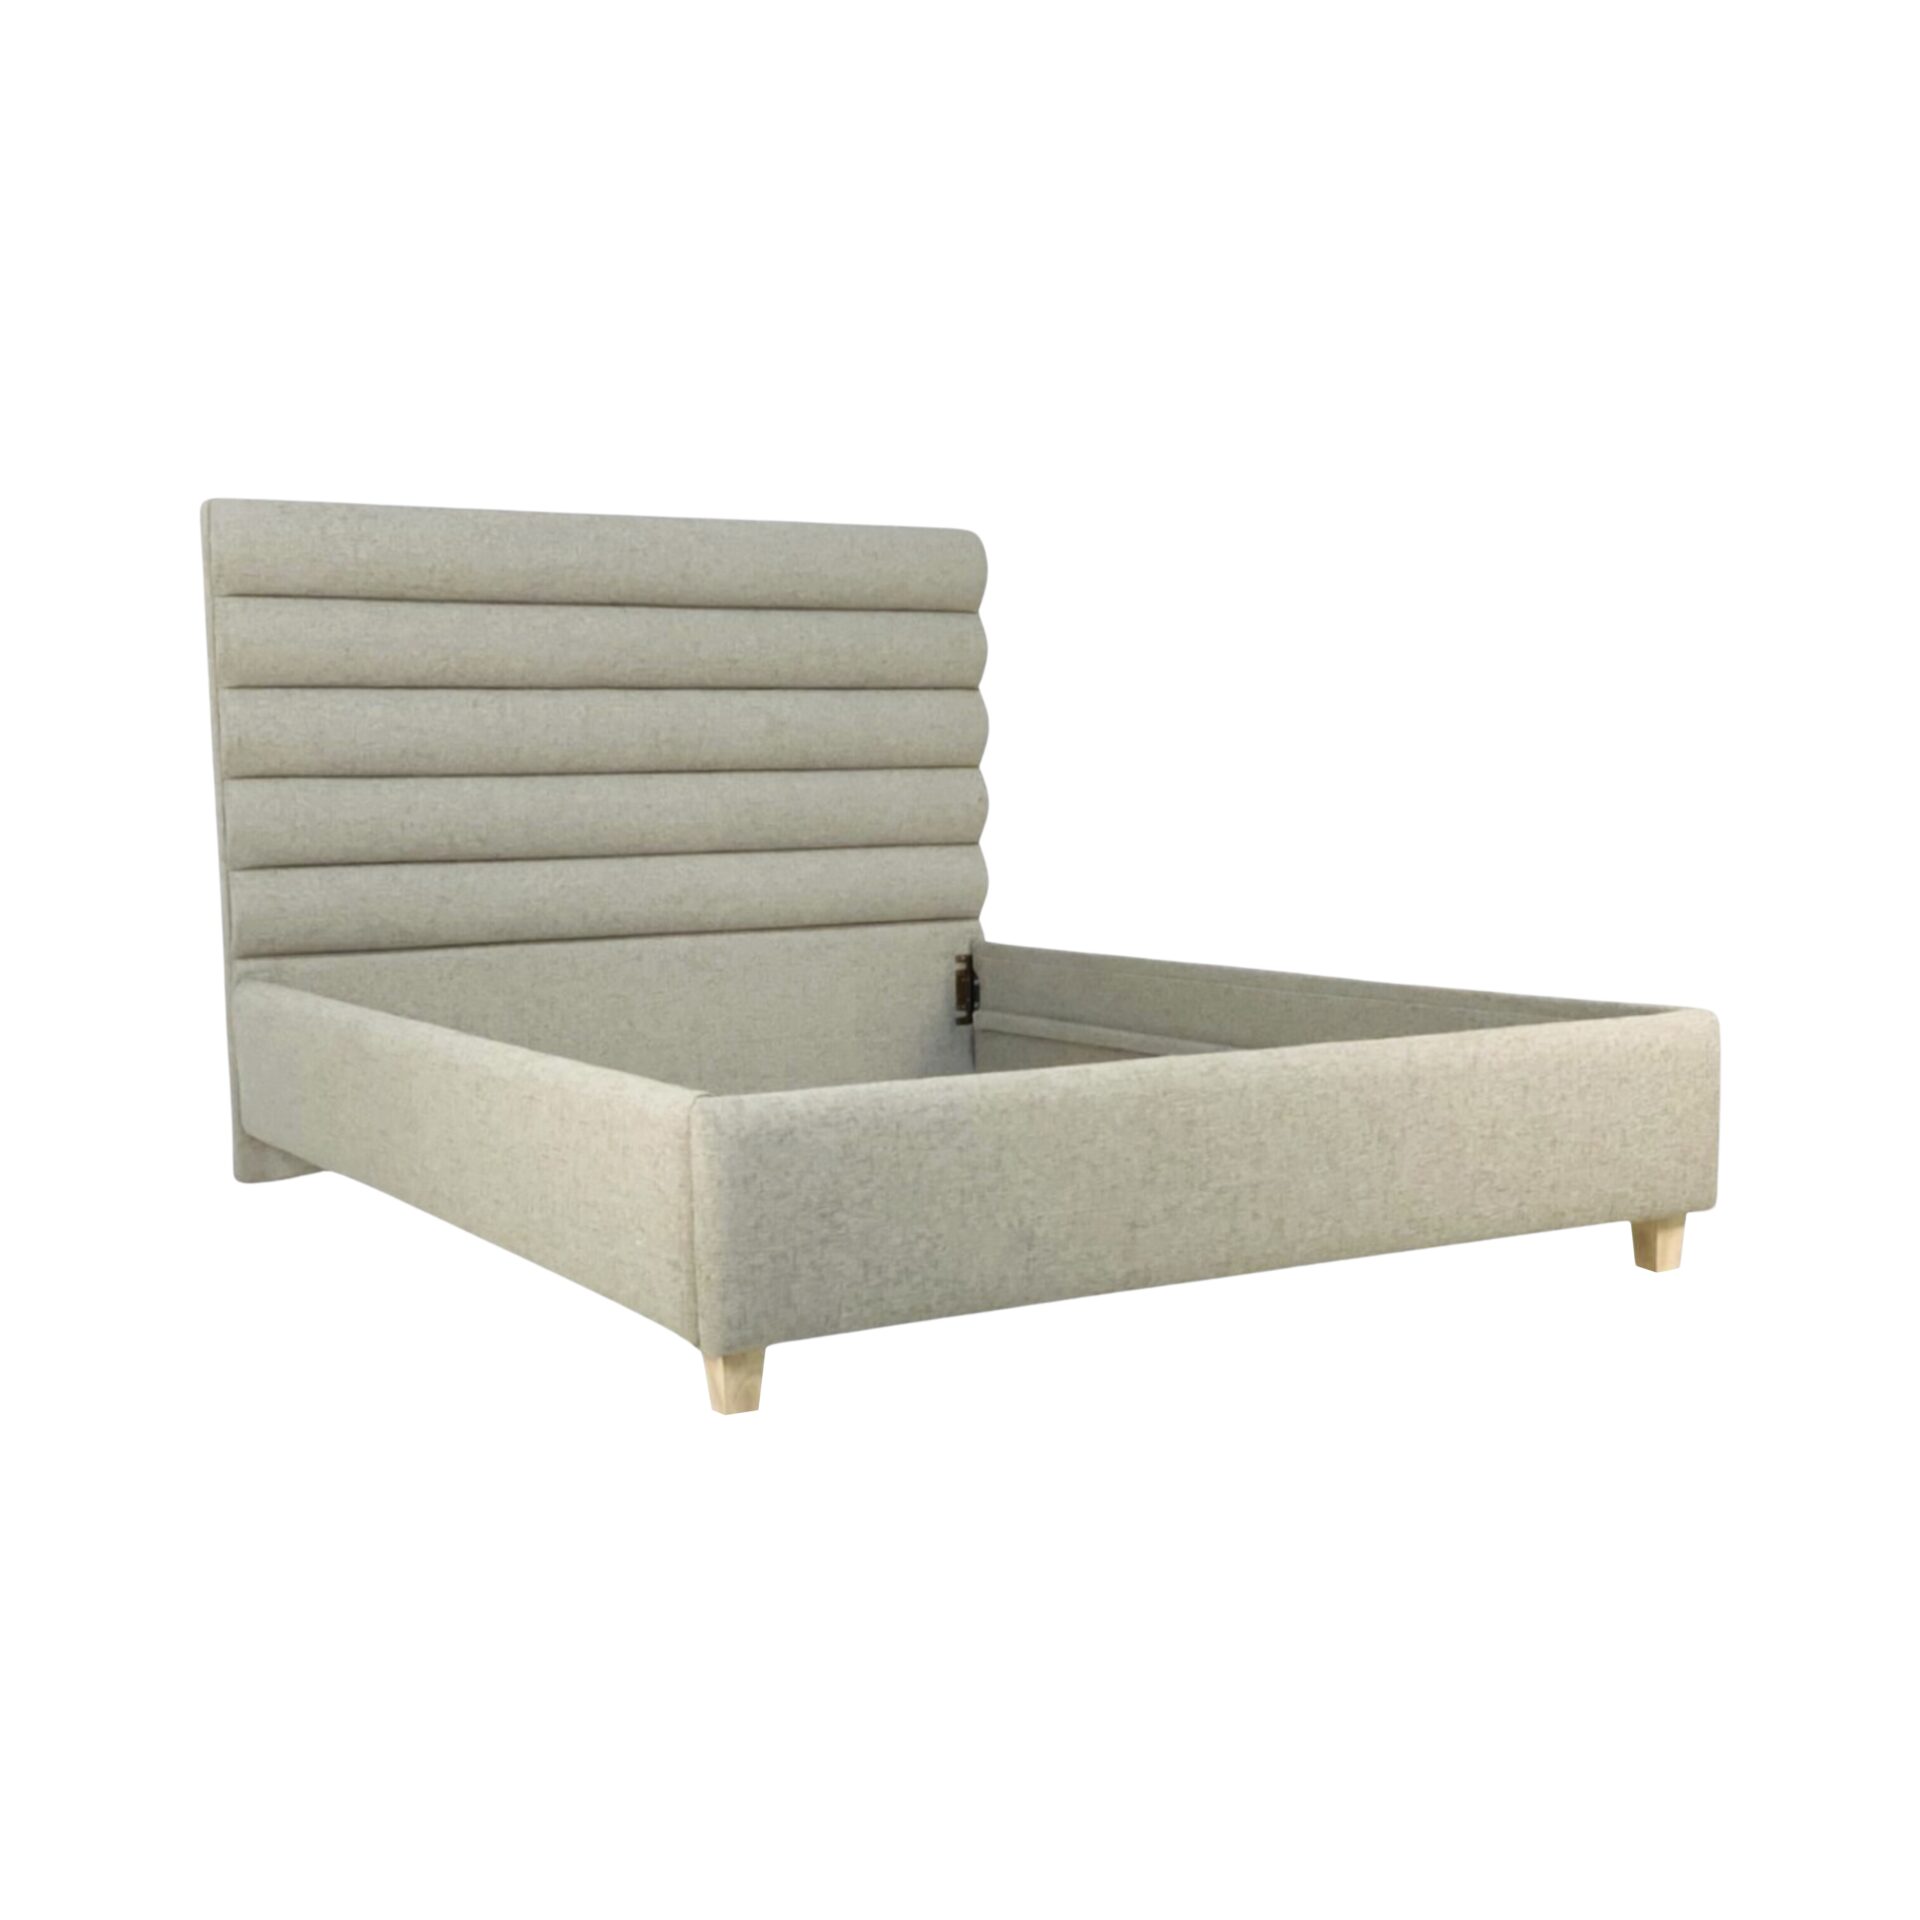 AMITIS-S-freestanding-upholstered-bed-luxury-furniture-blend-home-furnishings